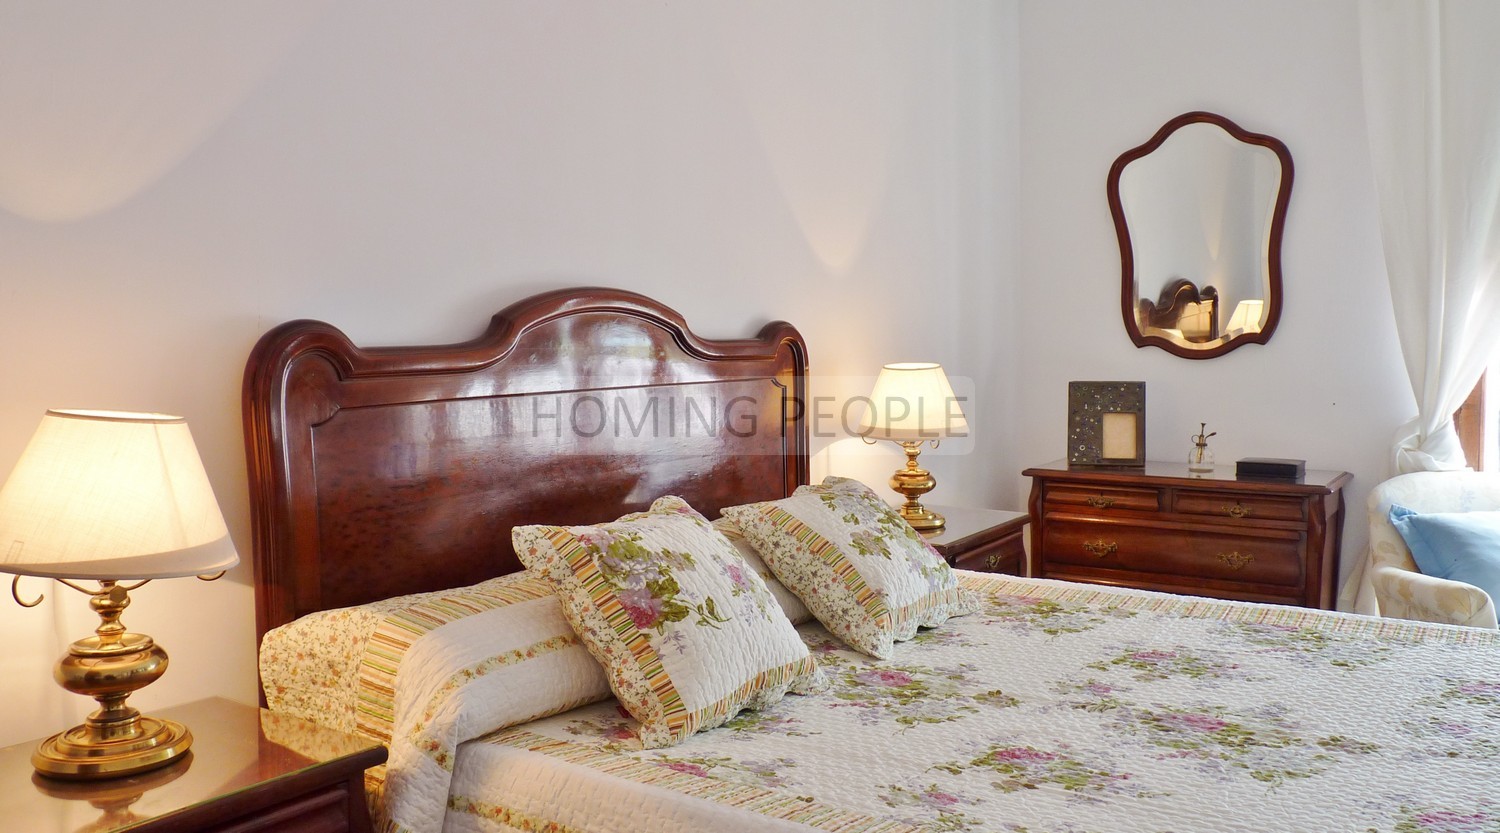 Genuine property: Finca with full of charm, traditional house walking distance to the centre